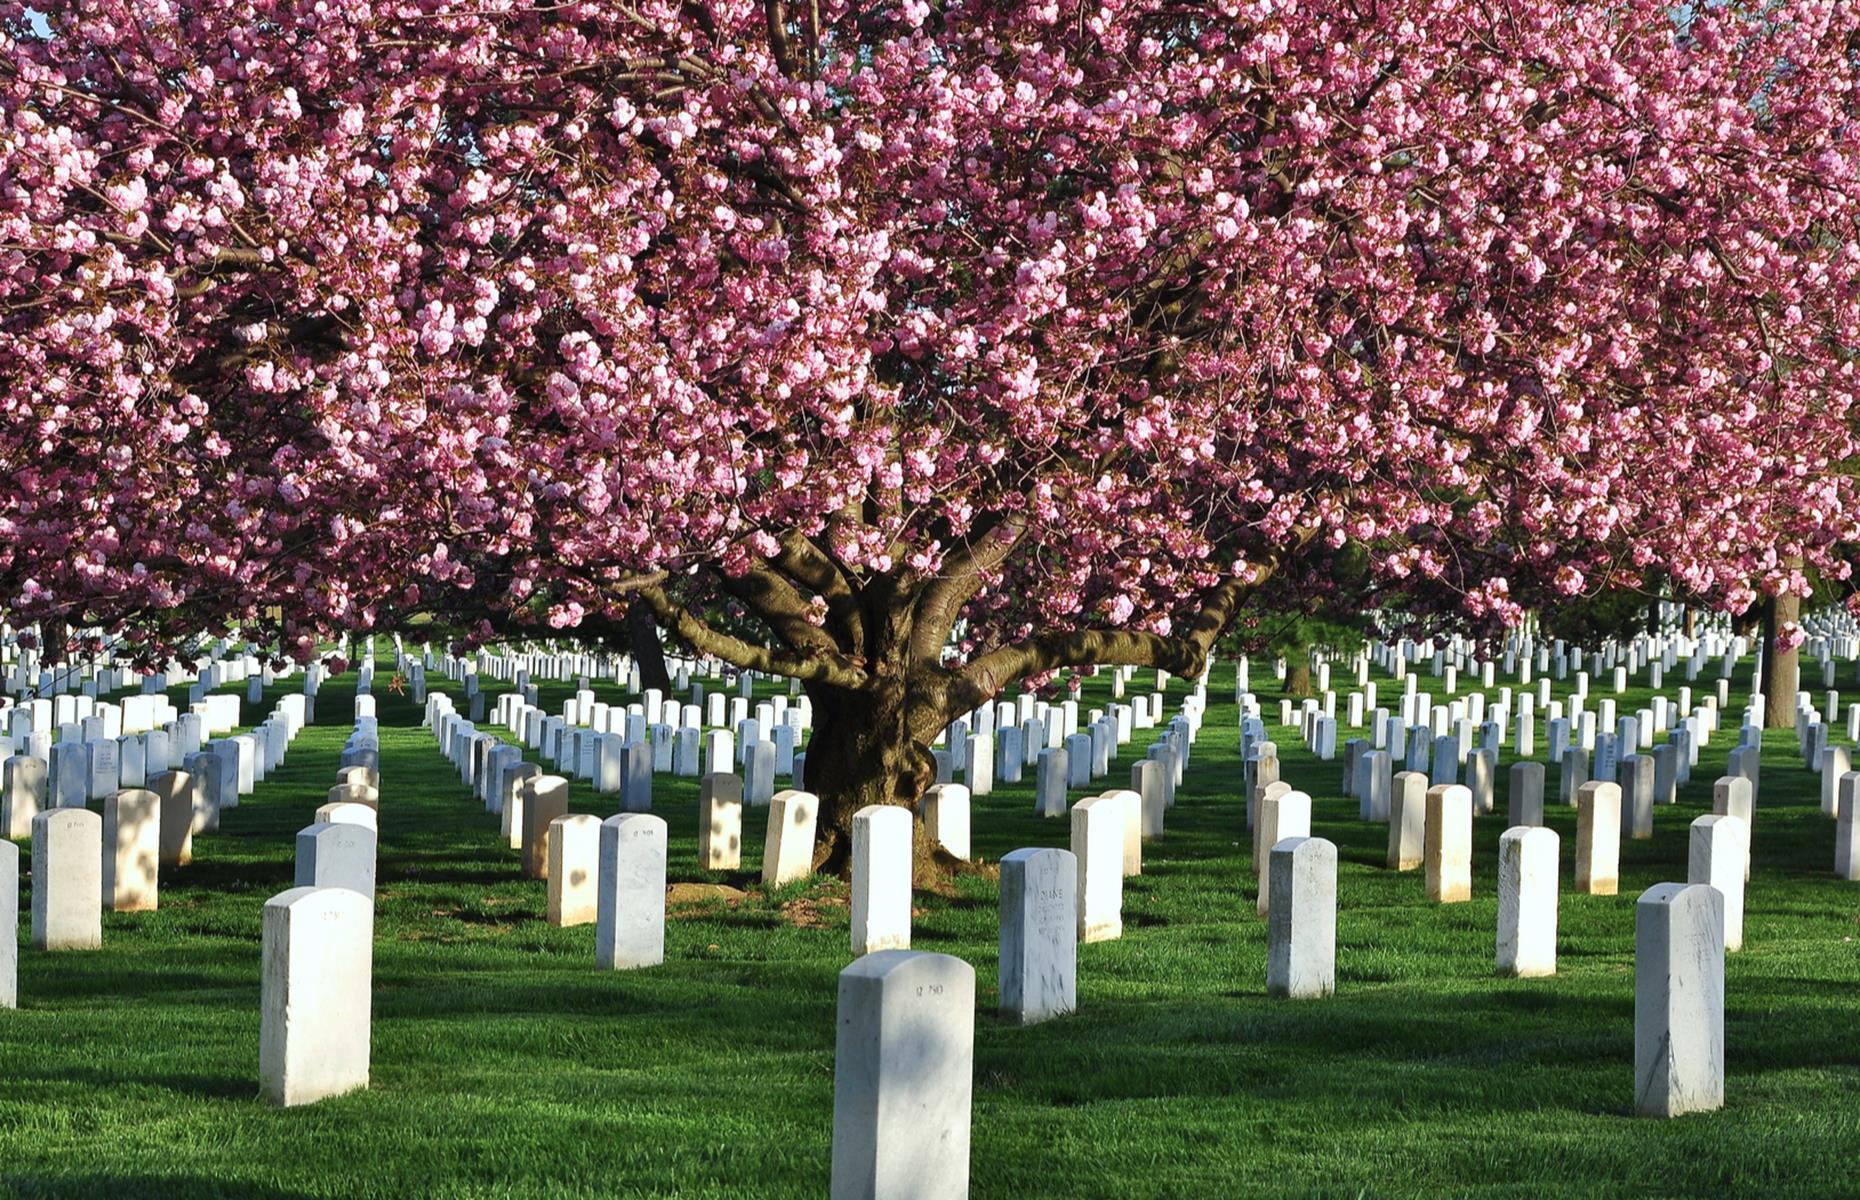 This sprawling military cemetery in Virginia is most famous as the resting place of John F Kennedy: an eternal flame has burnt at the gravesite of the assassinated 35th president since 1963. More than 300,000 American service people are also buried here, honored with simple white gravestones. The Tomb of the Unknown Soldier has become an especially moving symbol of the thousands of war dead who were never identified or recovered.